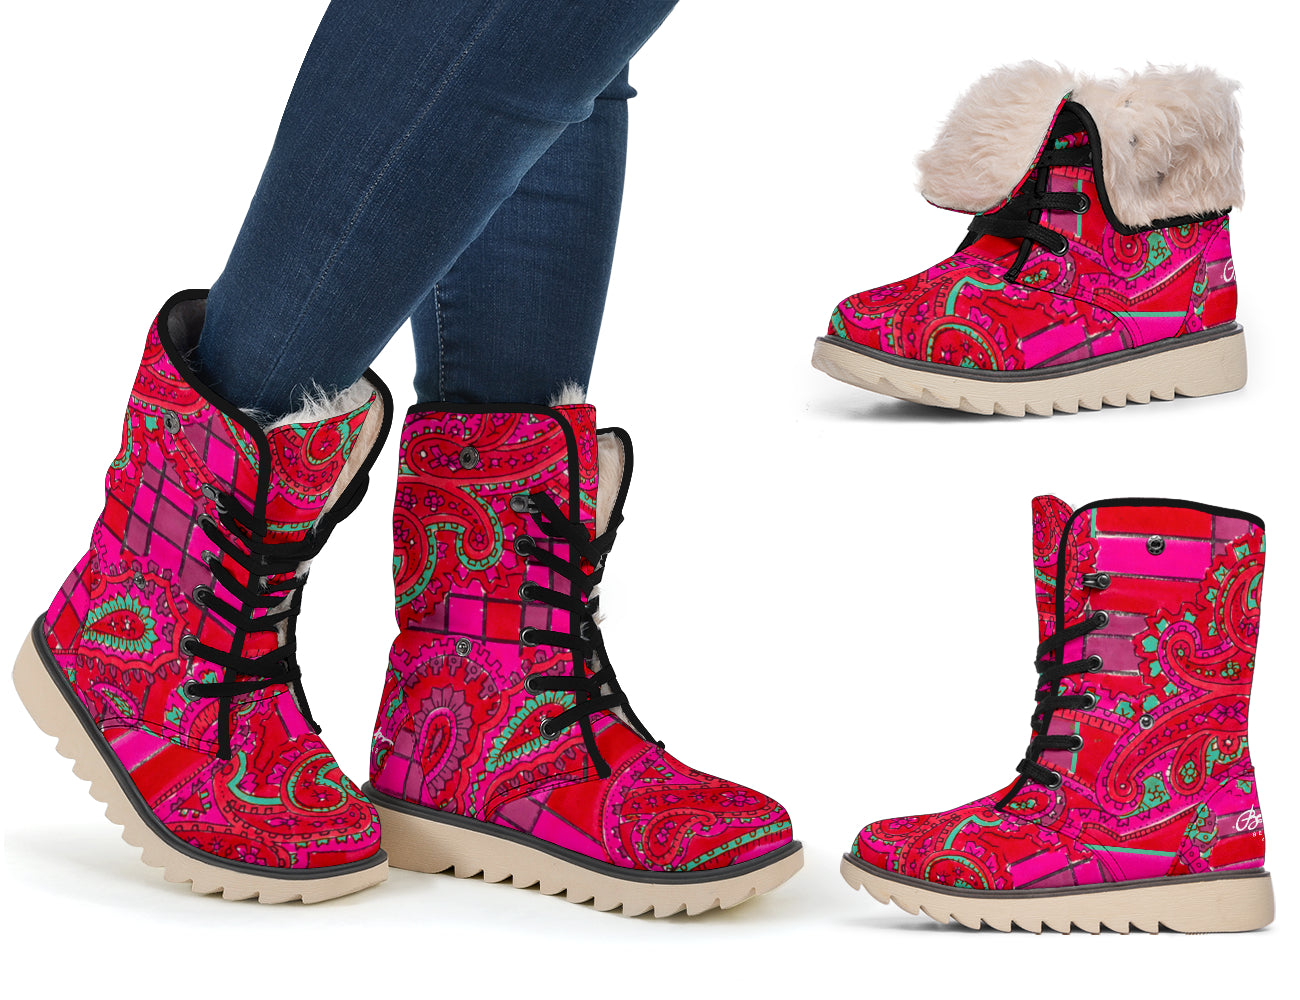 Bright Fuscia and Red Poppy Paisley on Plaid Polar Boots